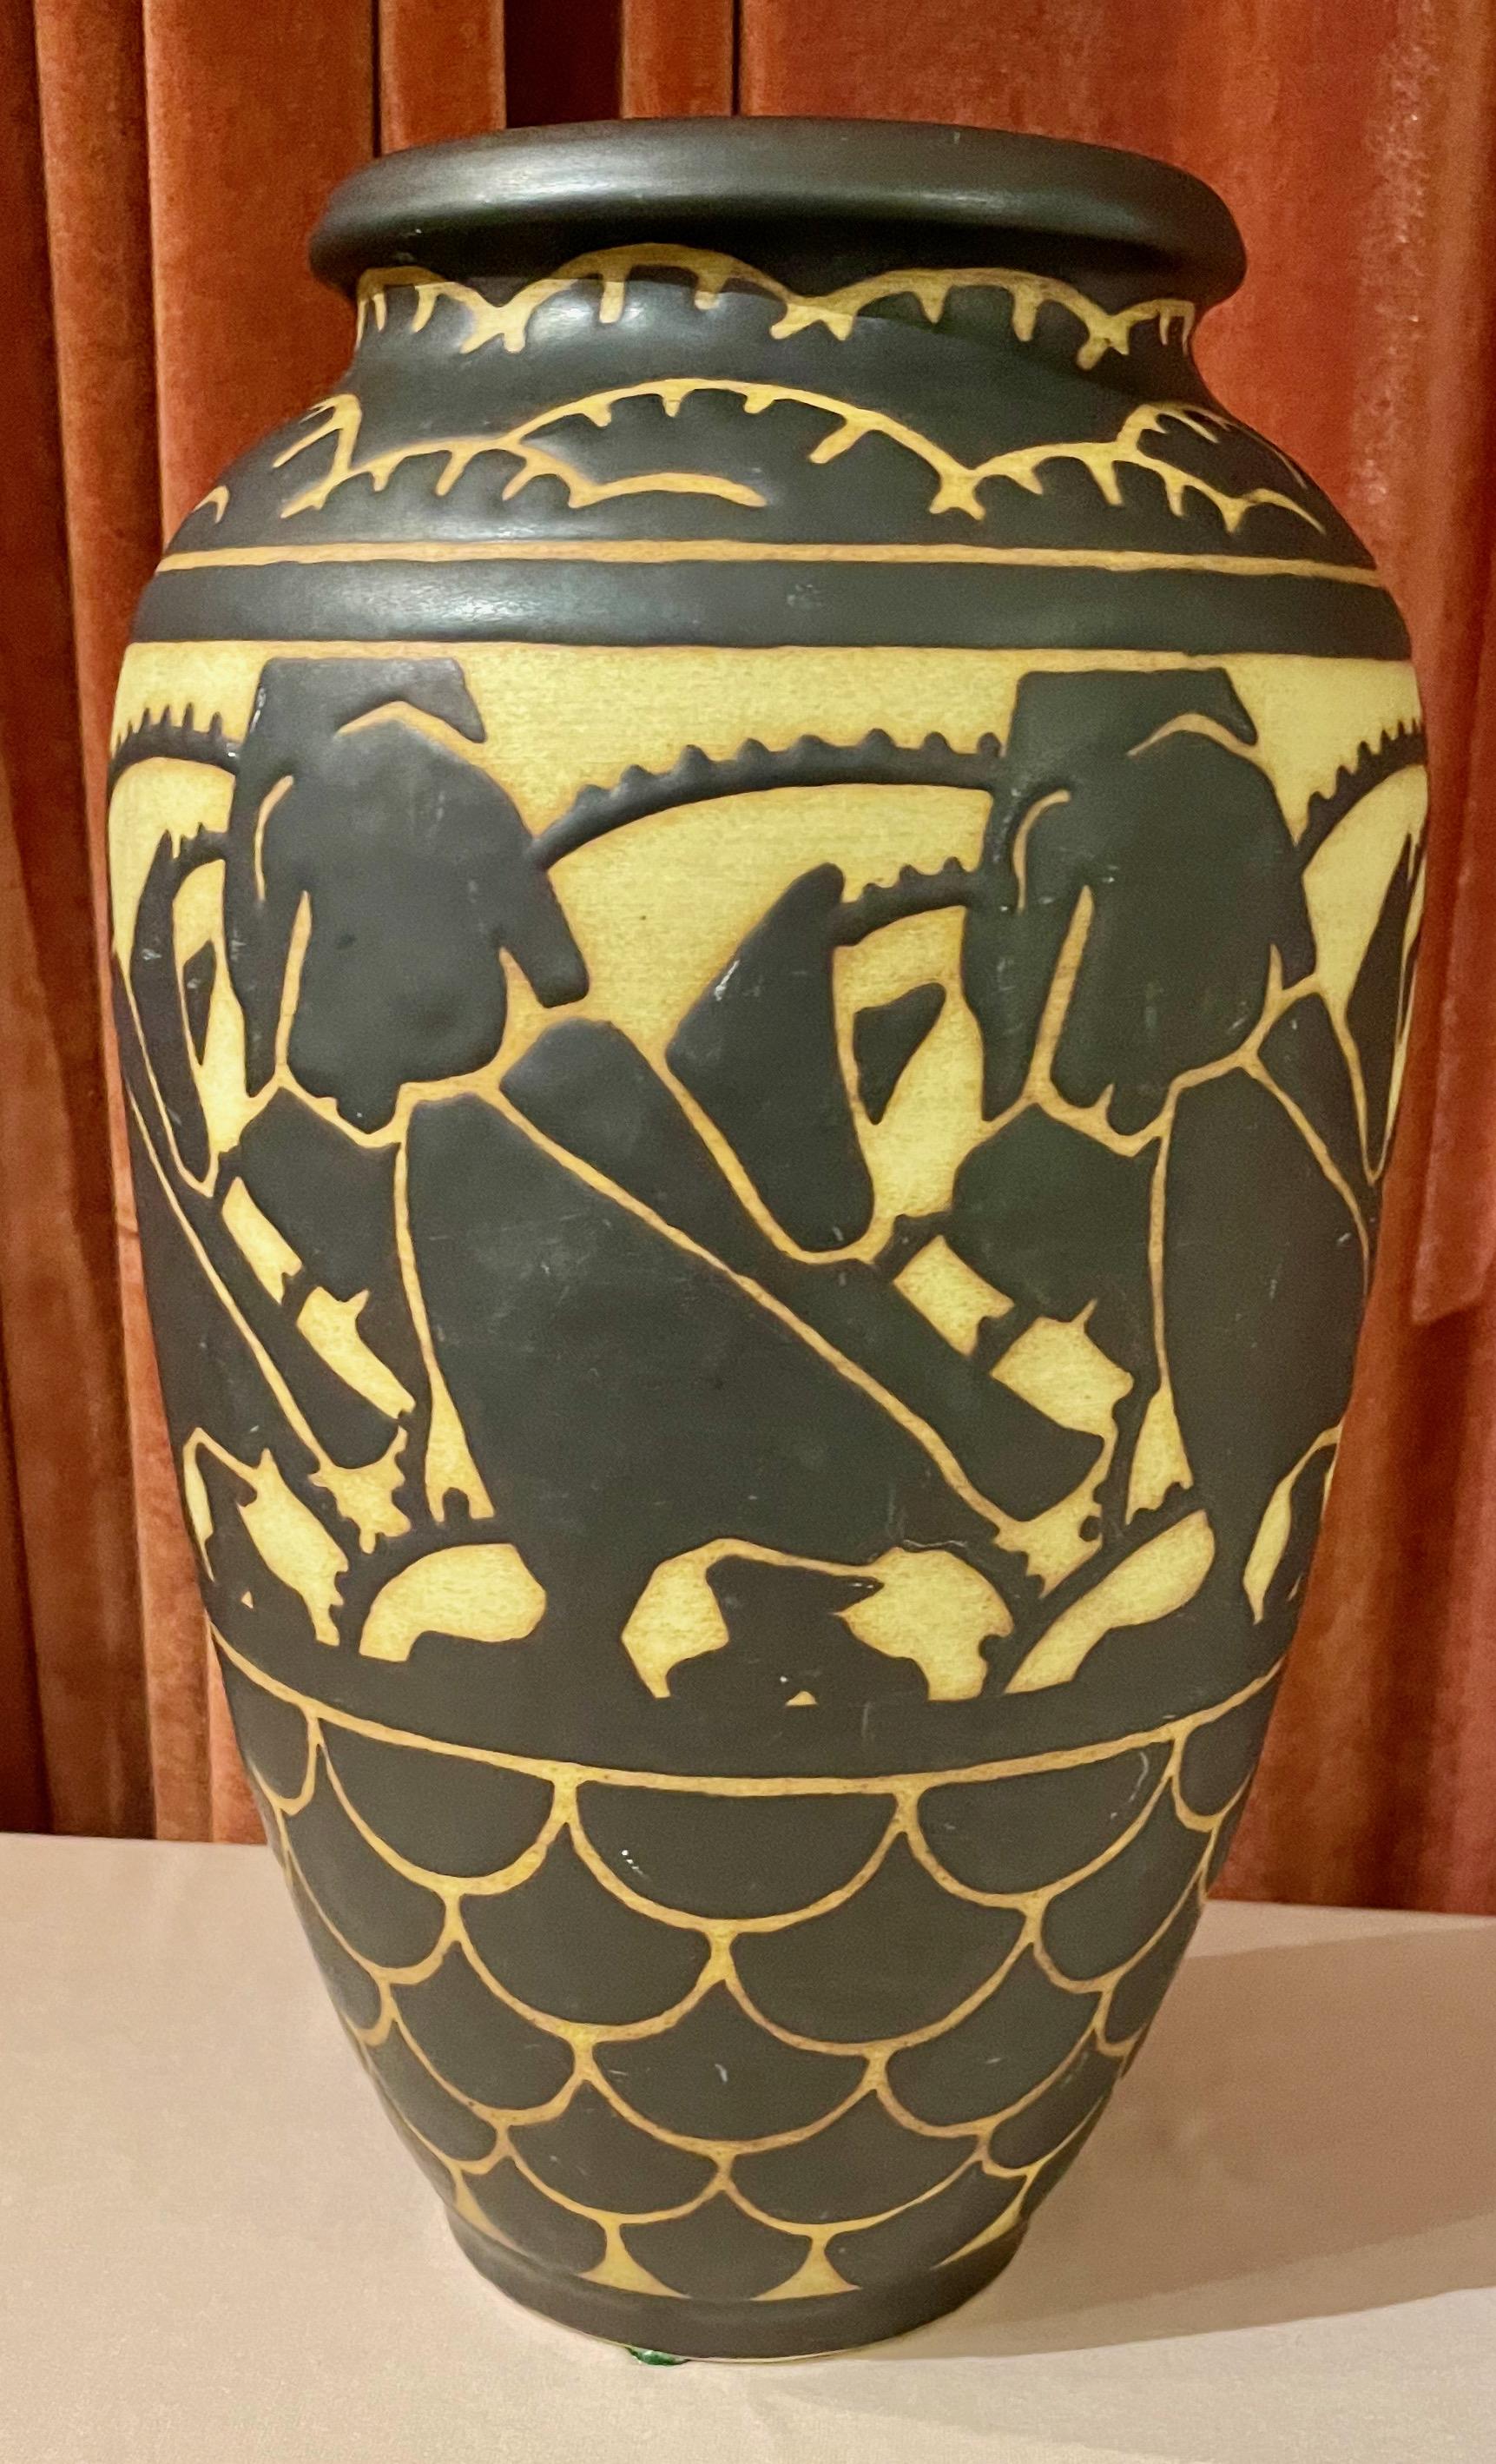 Art Deco Gres Keramis stoneware vase designed by Charles Catteau for Boch Freres of Belgium, circa 1925. These animal designs are the most sought after and most collectible of all the Catteau pieces. Stoneware pieces with animal motifs are even more